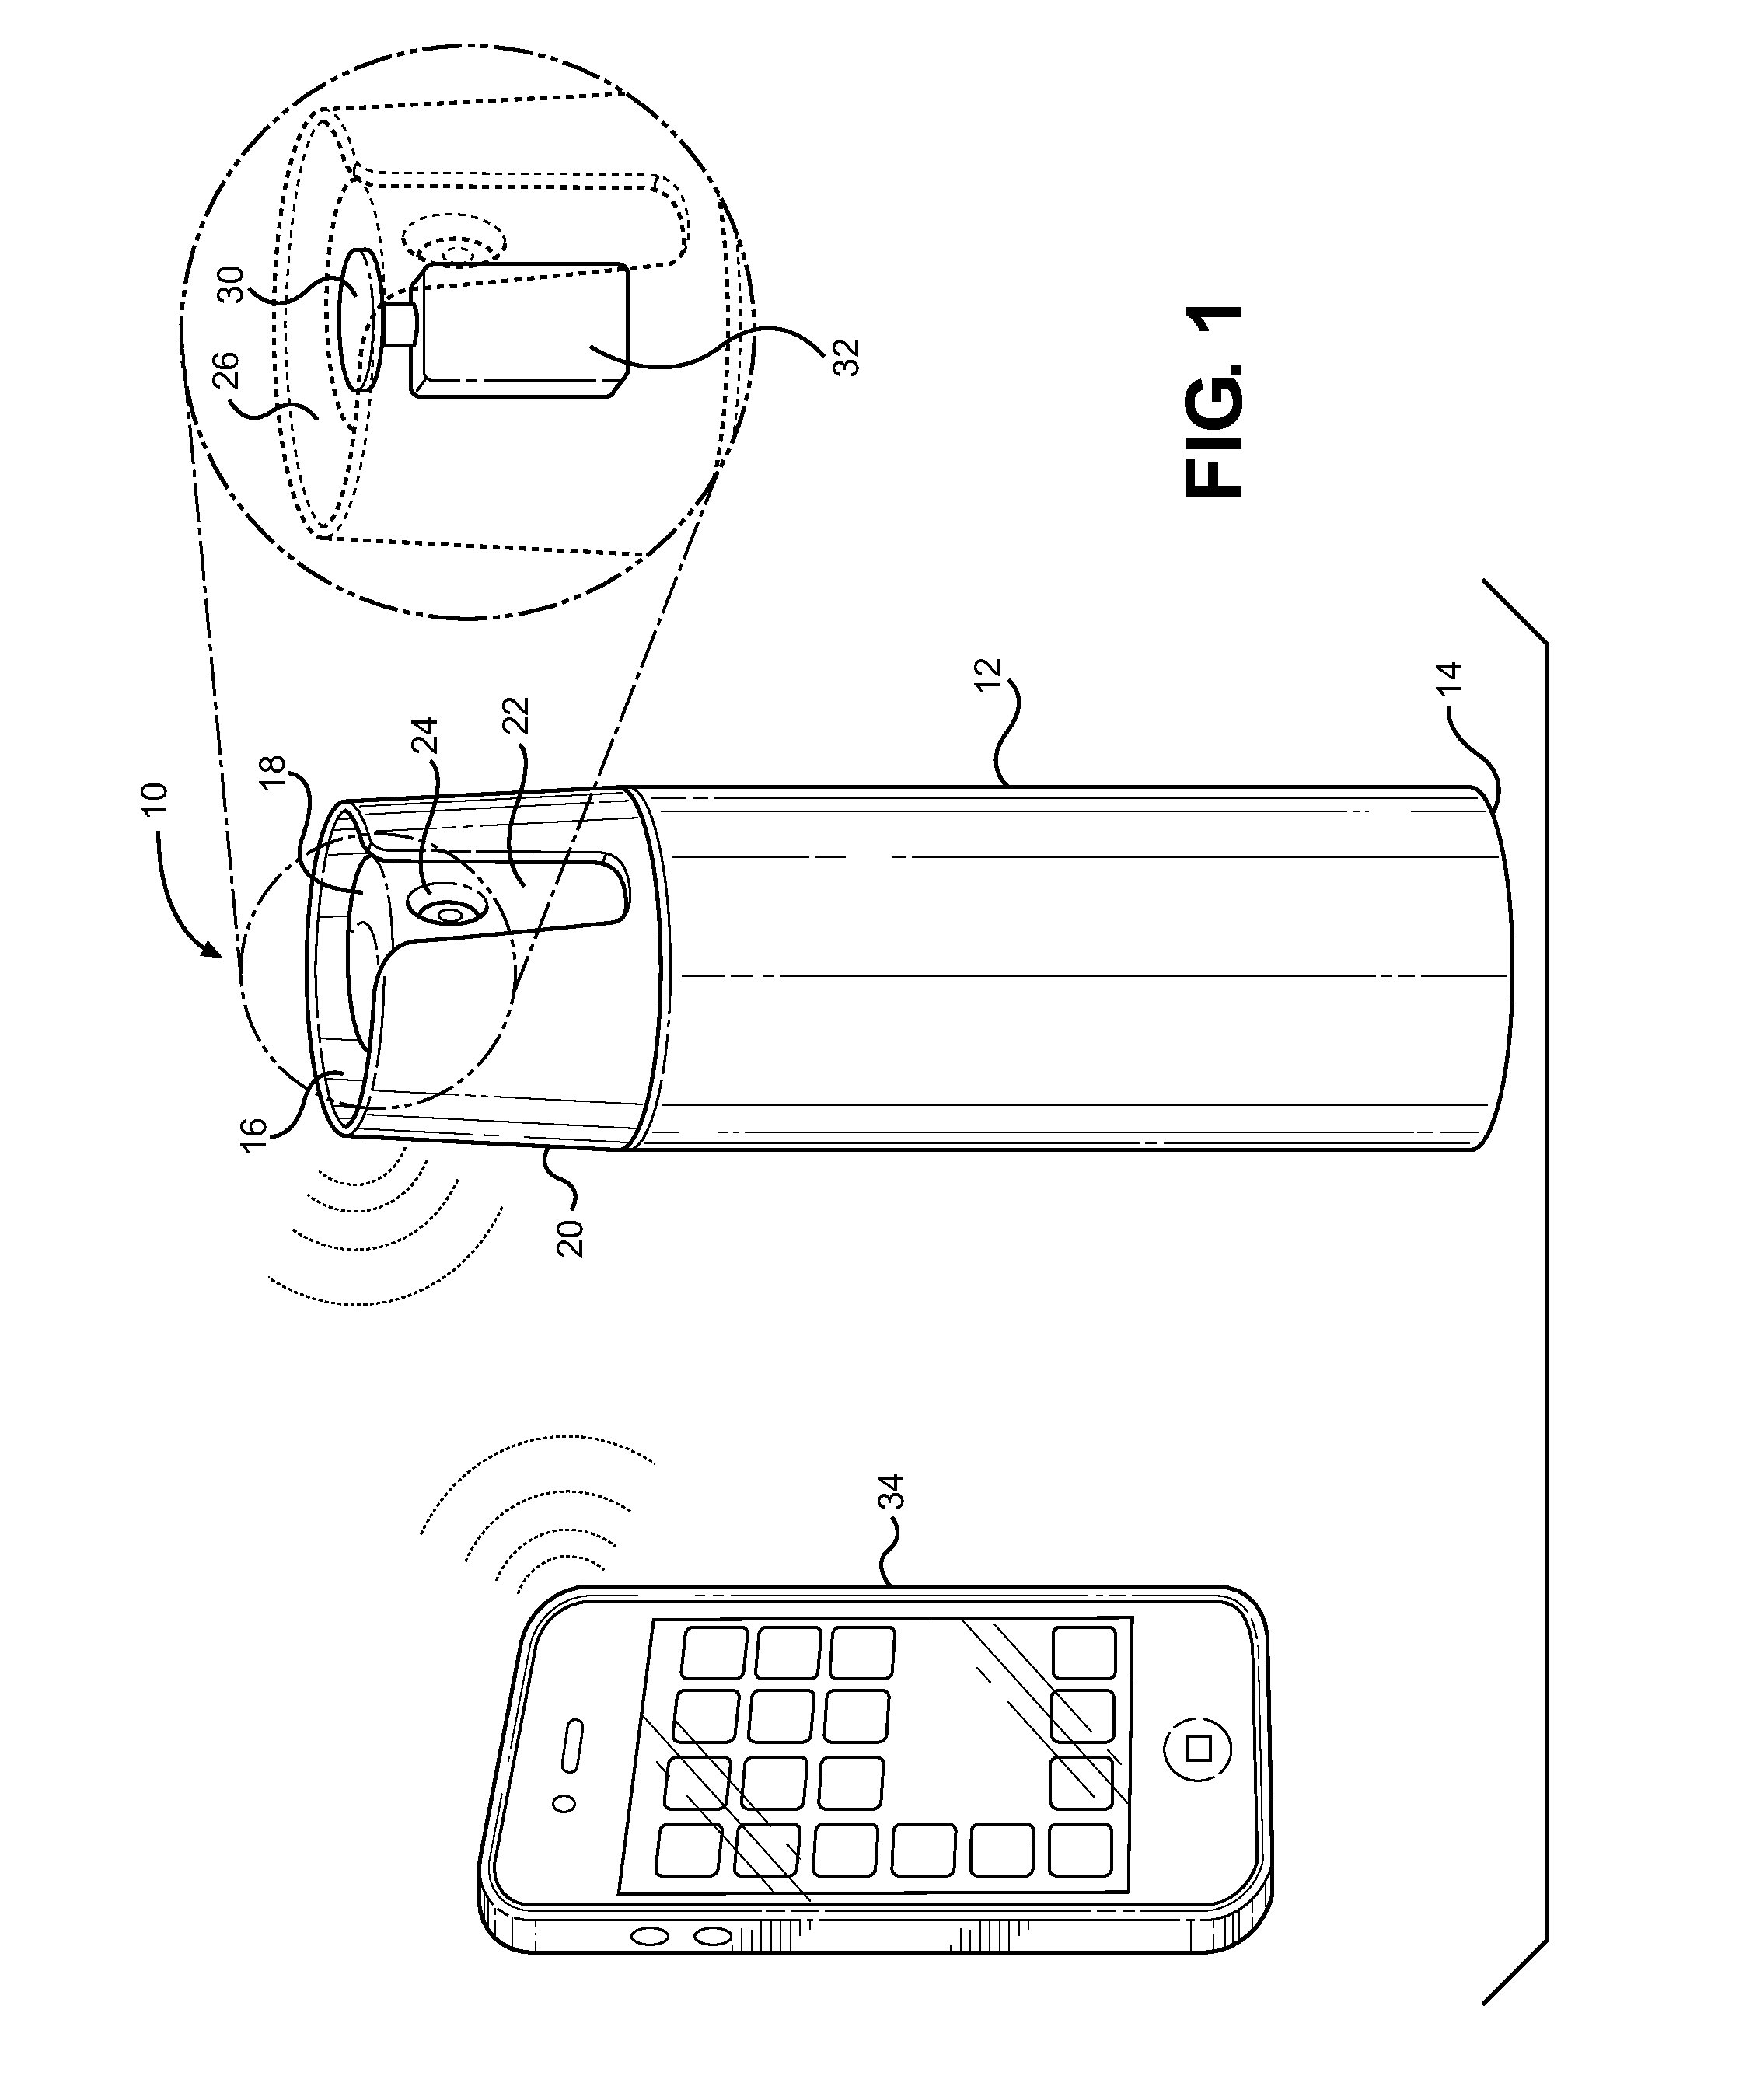 Personal Defense Device with Communication Capabilities